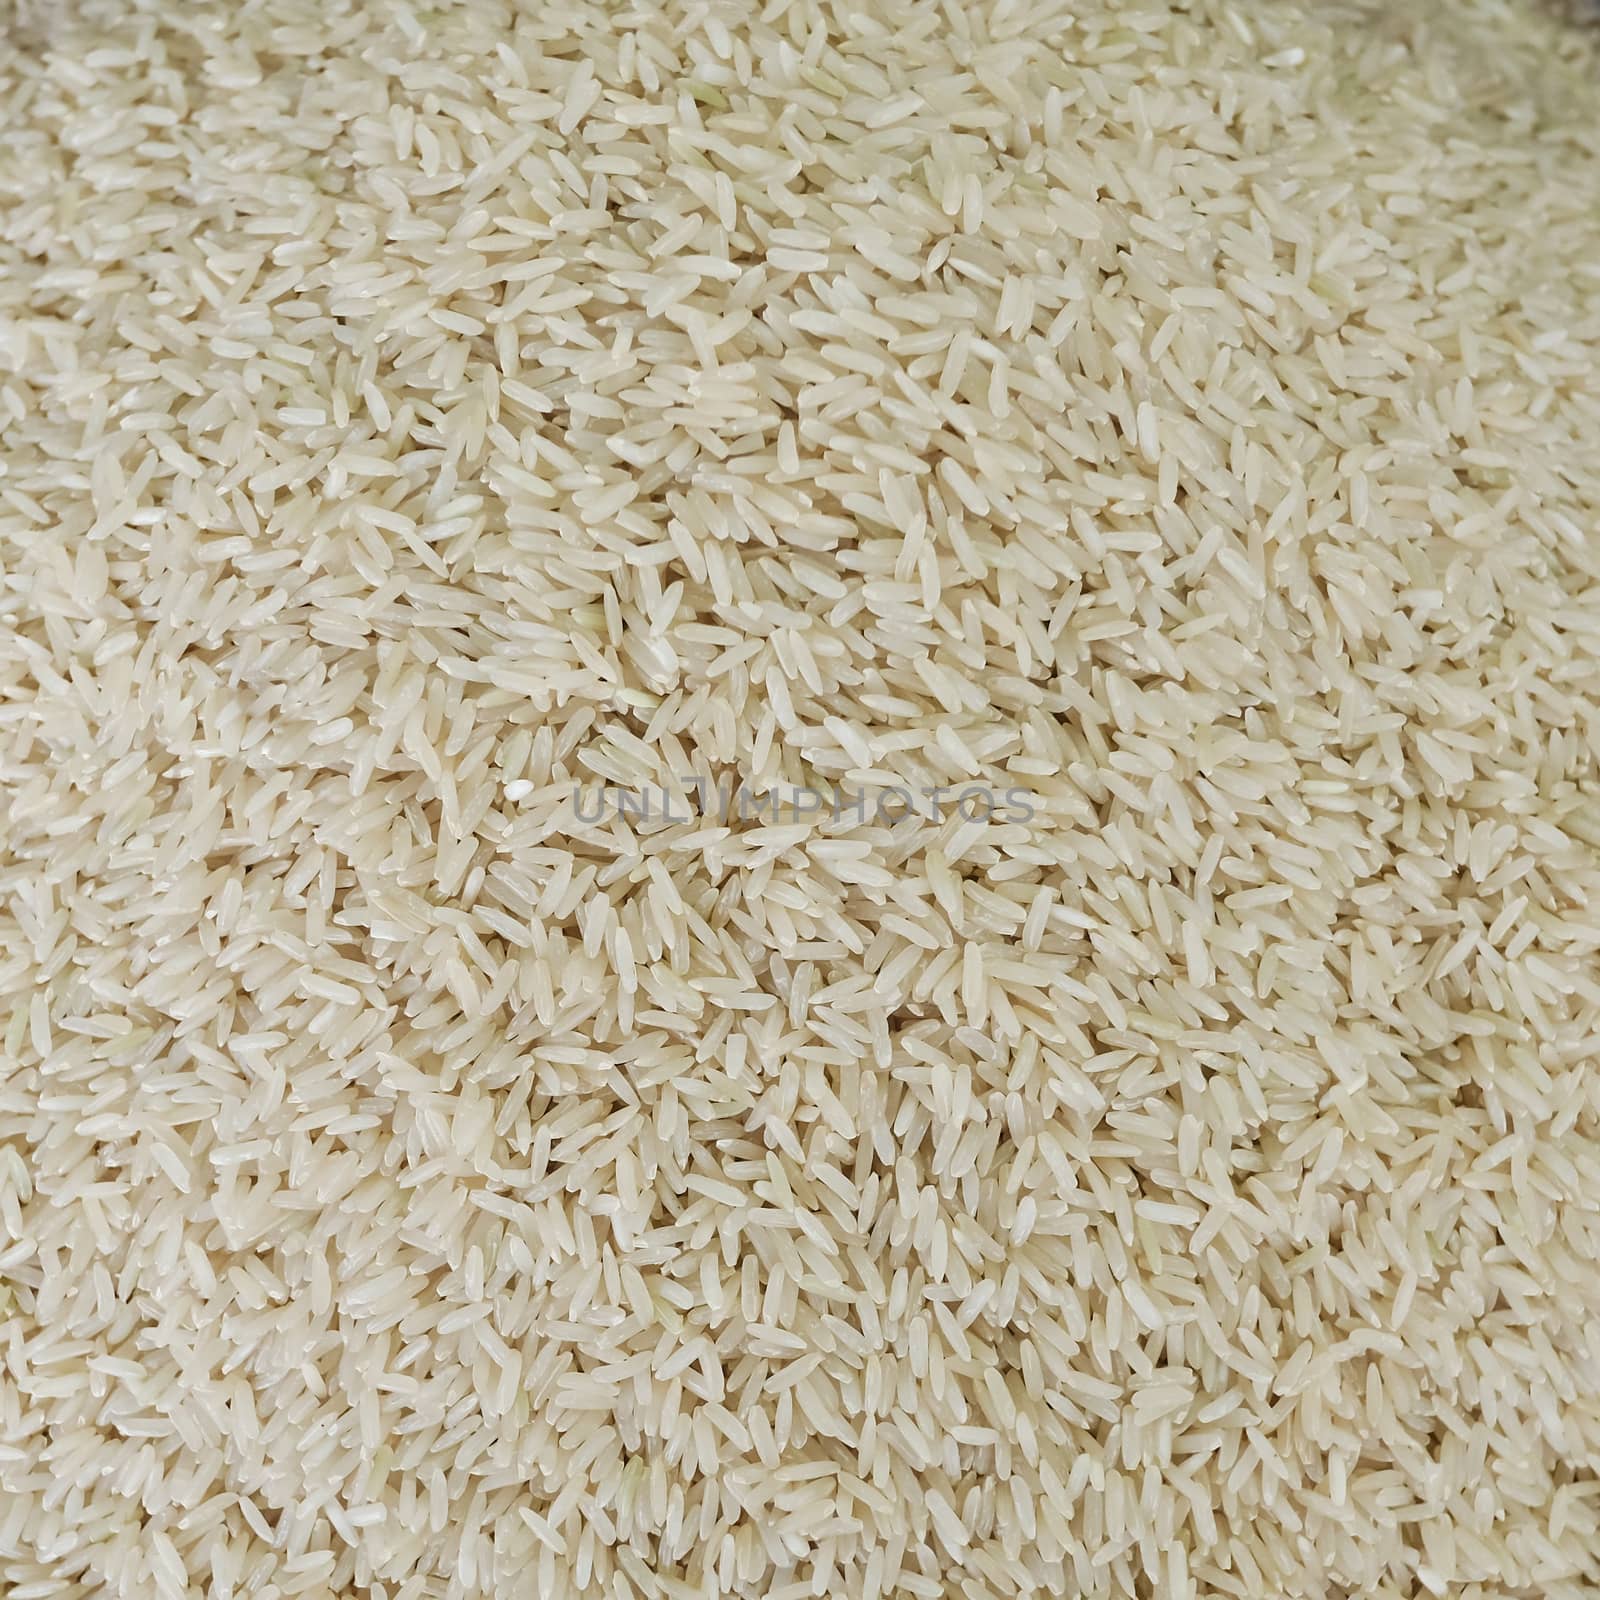 Uncooked white rice background by art9858